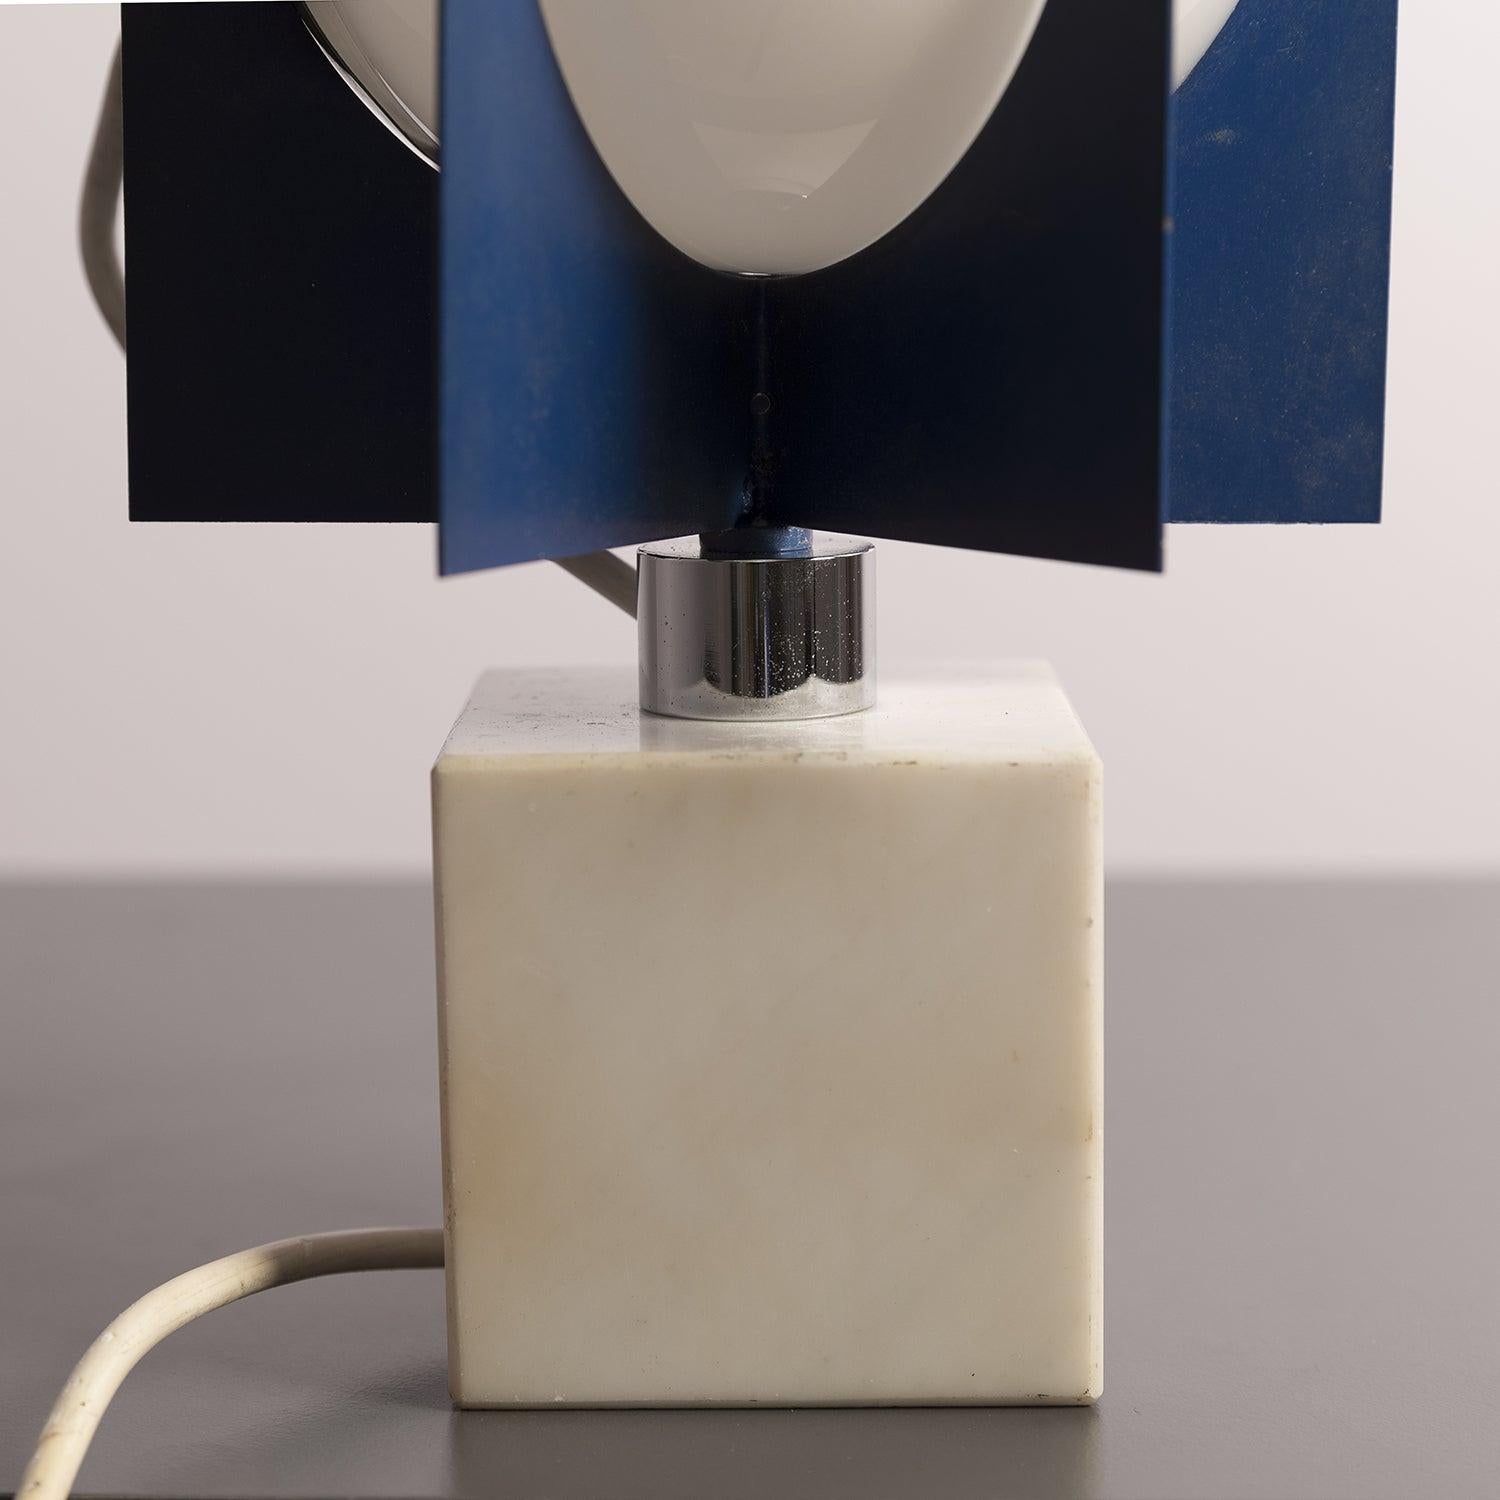 Table lamp with marble base, painted aluminum structure and three white opaline glass diffusers.